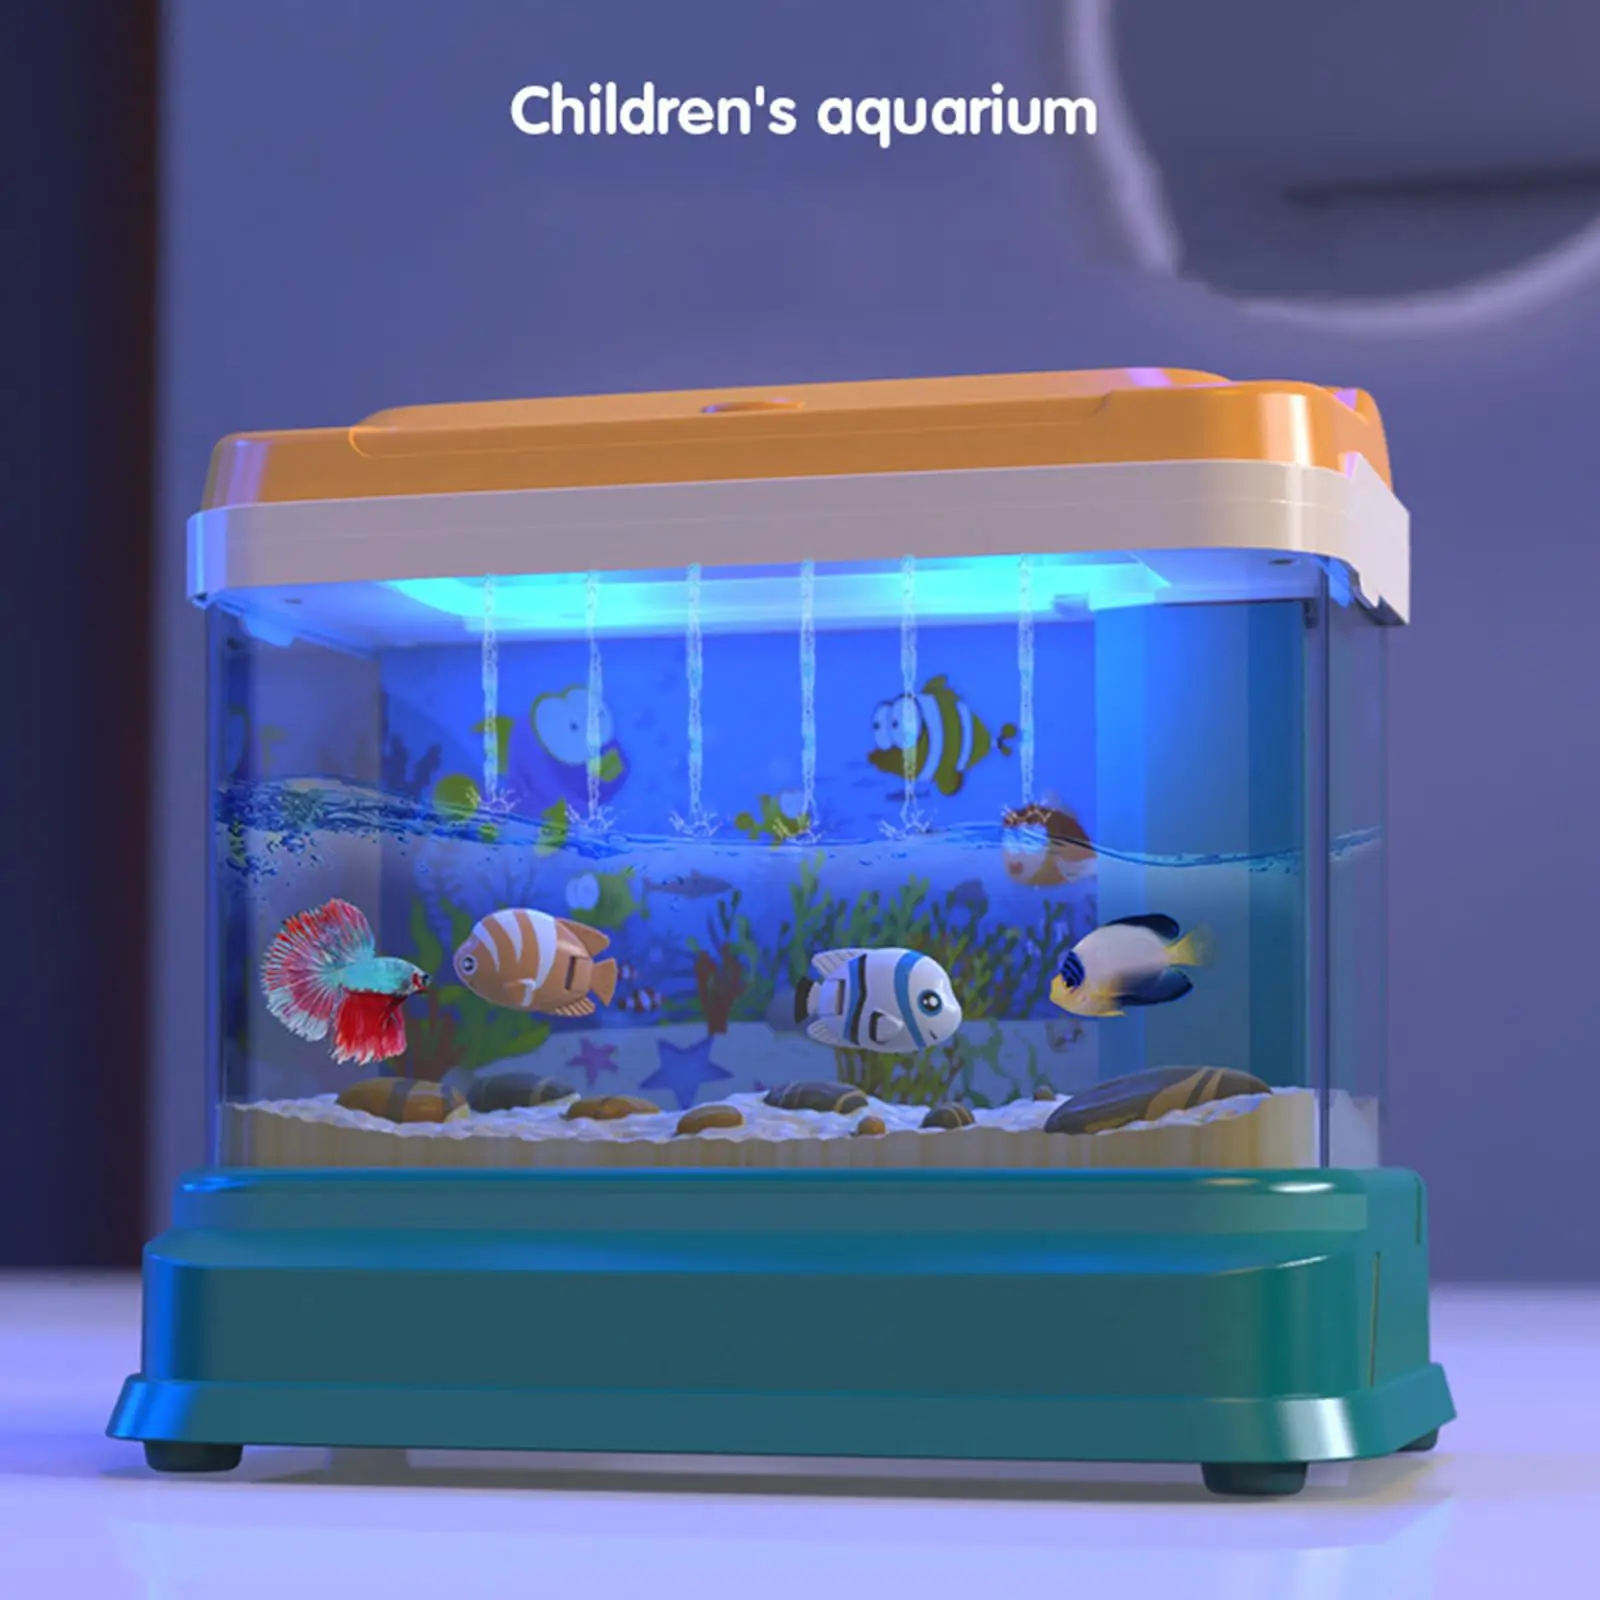 Artificial Fish Tank with Moving Music Fishing Rod Fine Motor Skill Training Small Aquarium for Toddlers Kids Children